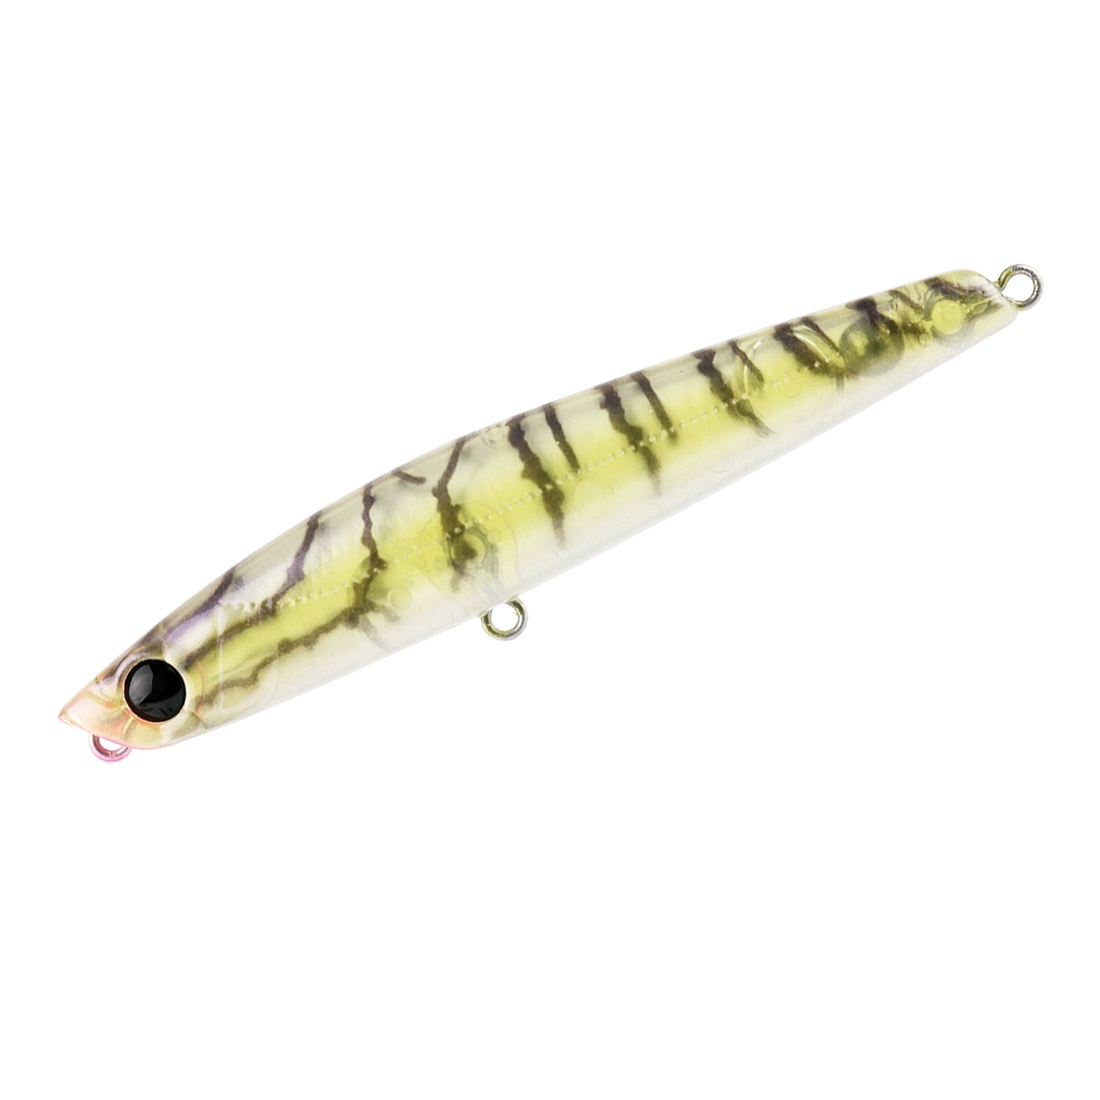 Bassday Sugapen 70mm Floating Surface Fishing Lure - Outback Angler